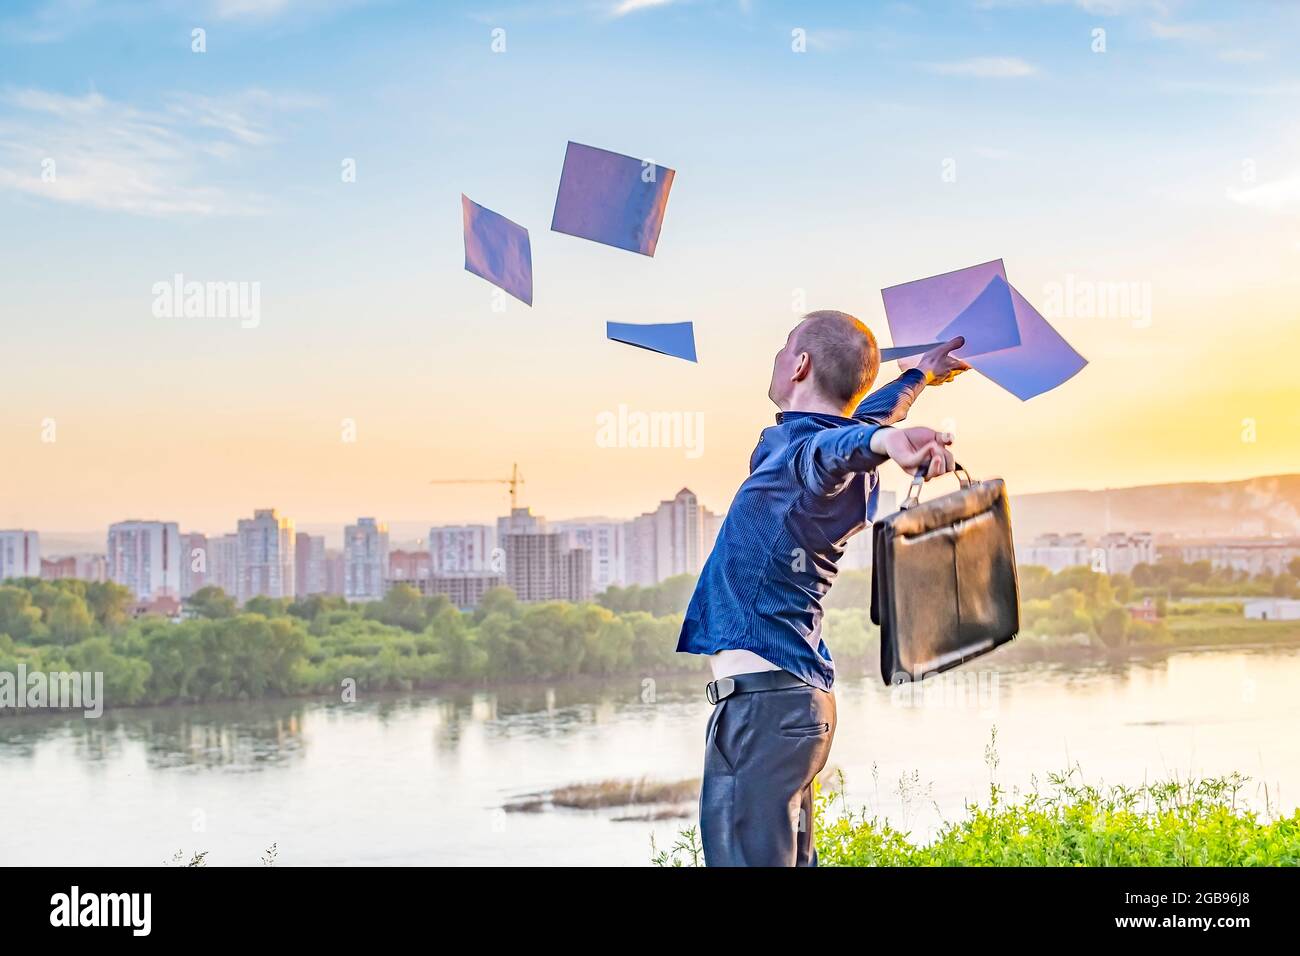 person, a man, a businessman throws documents, papers up in the air with joy as a sign of repayment of the loan, getting rid of debt obligations Stock Photo